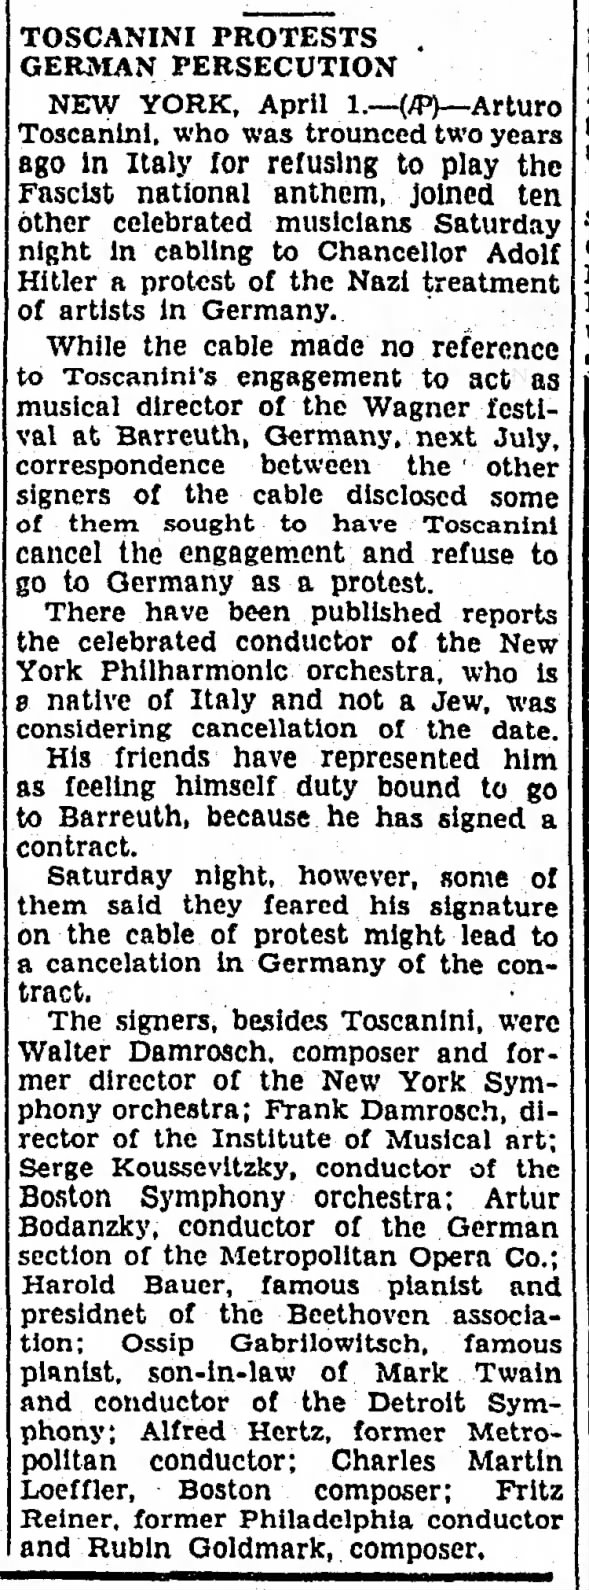 Toscanini Protests German Persecution